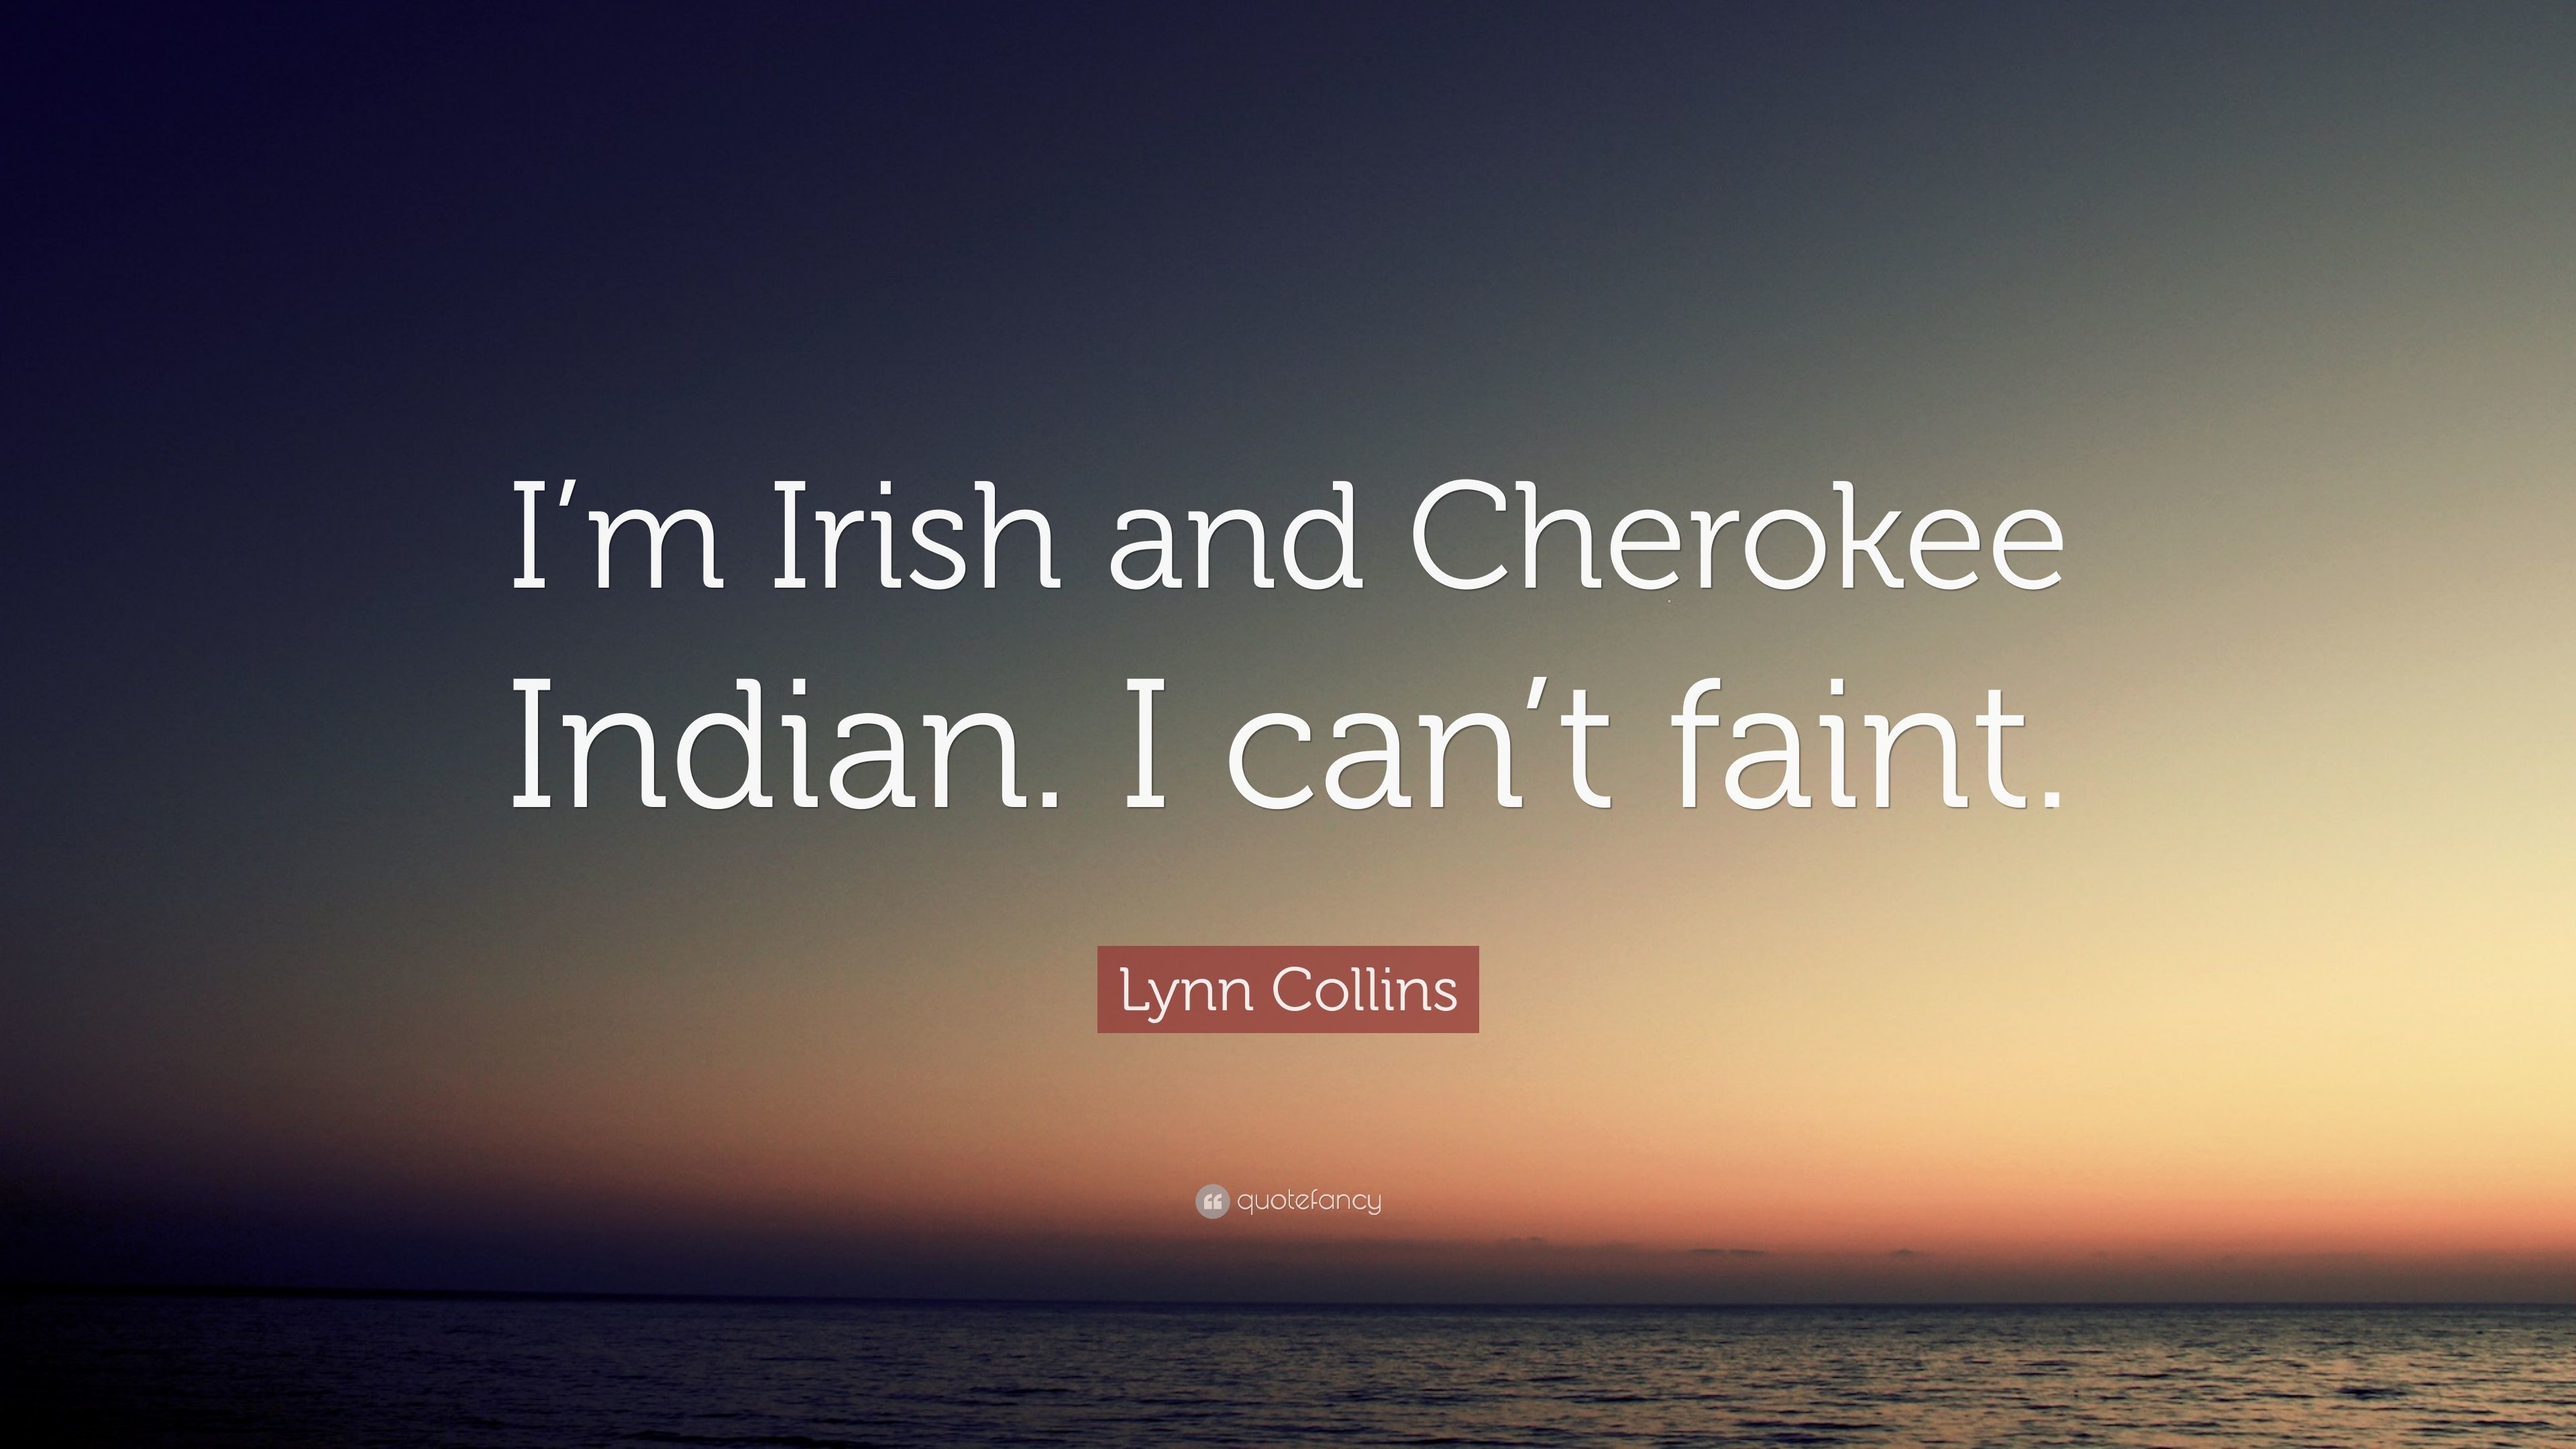 3840x2160 Lynn Collins Quote: “I'm Irish and Cherokee Indian. I can'